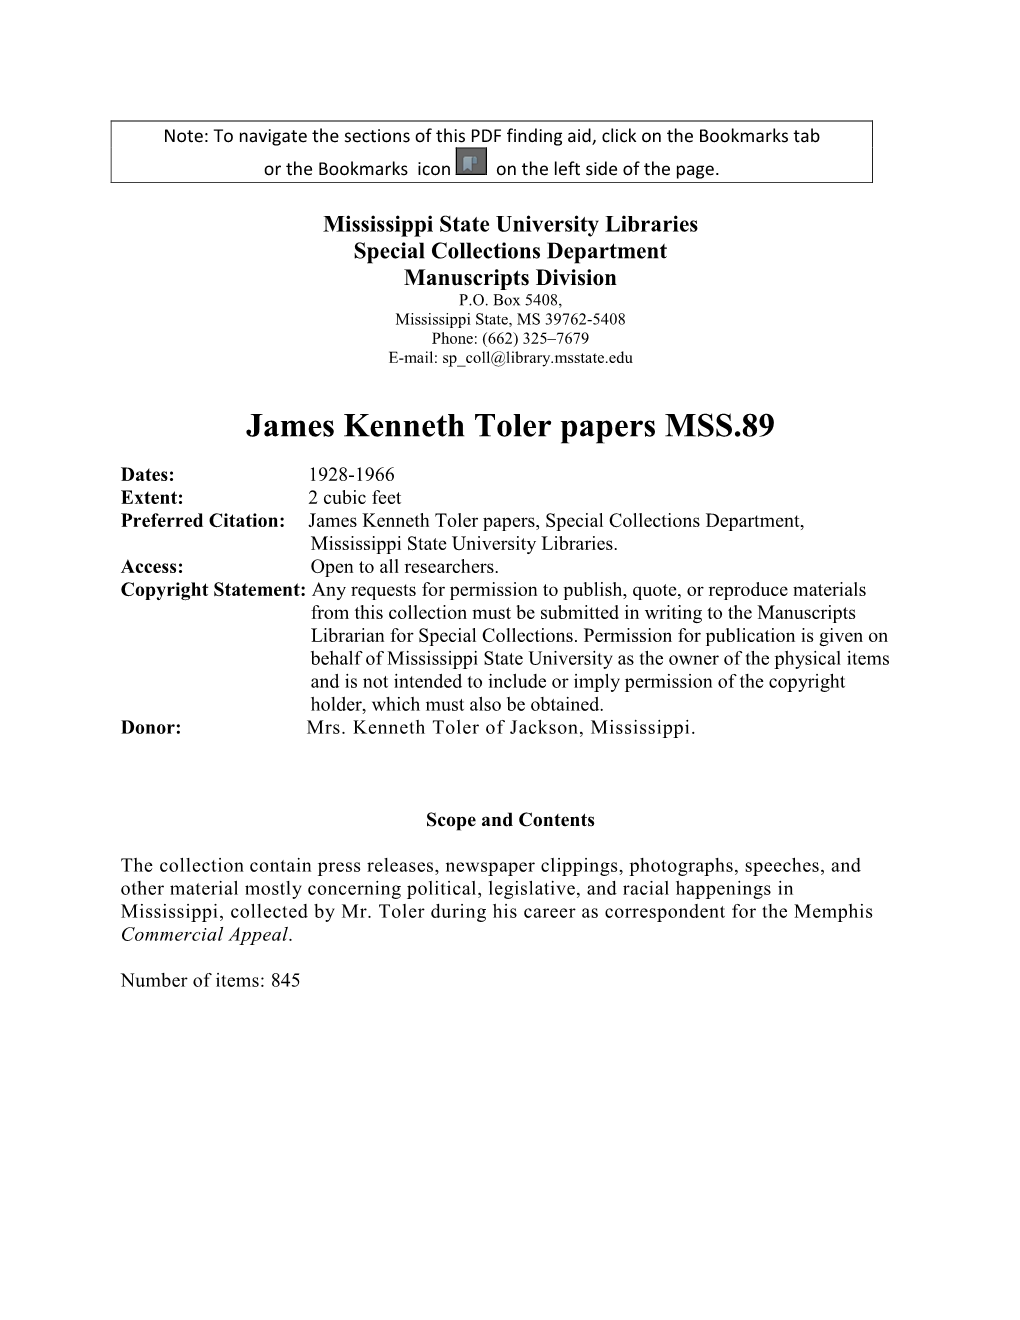 James Kenneth Toler Papers MSS.89